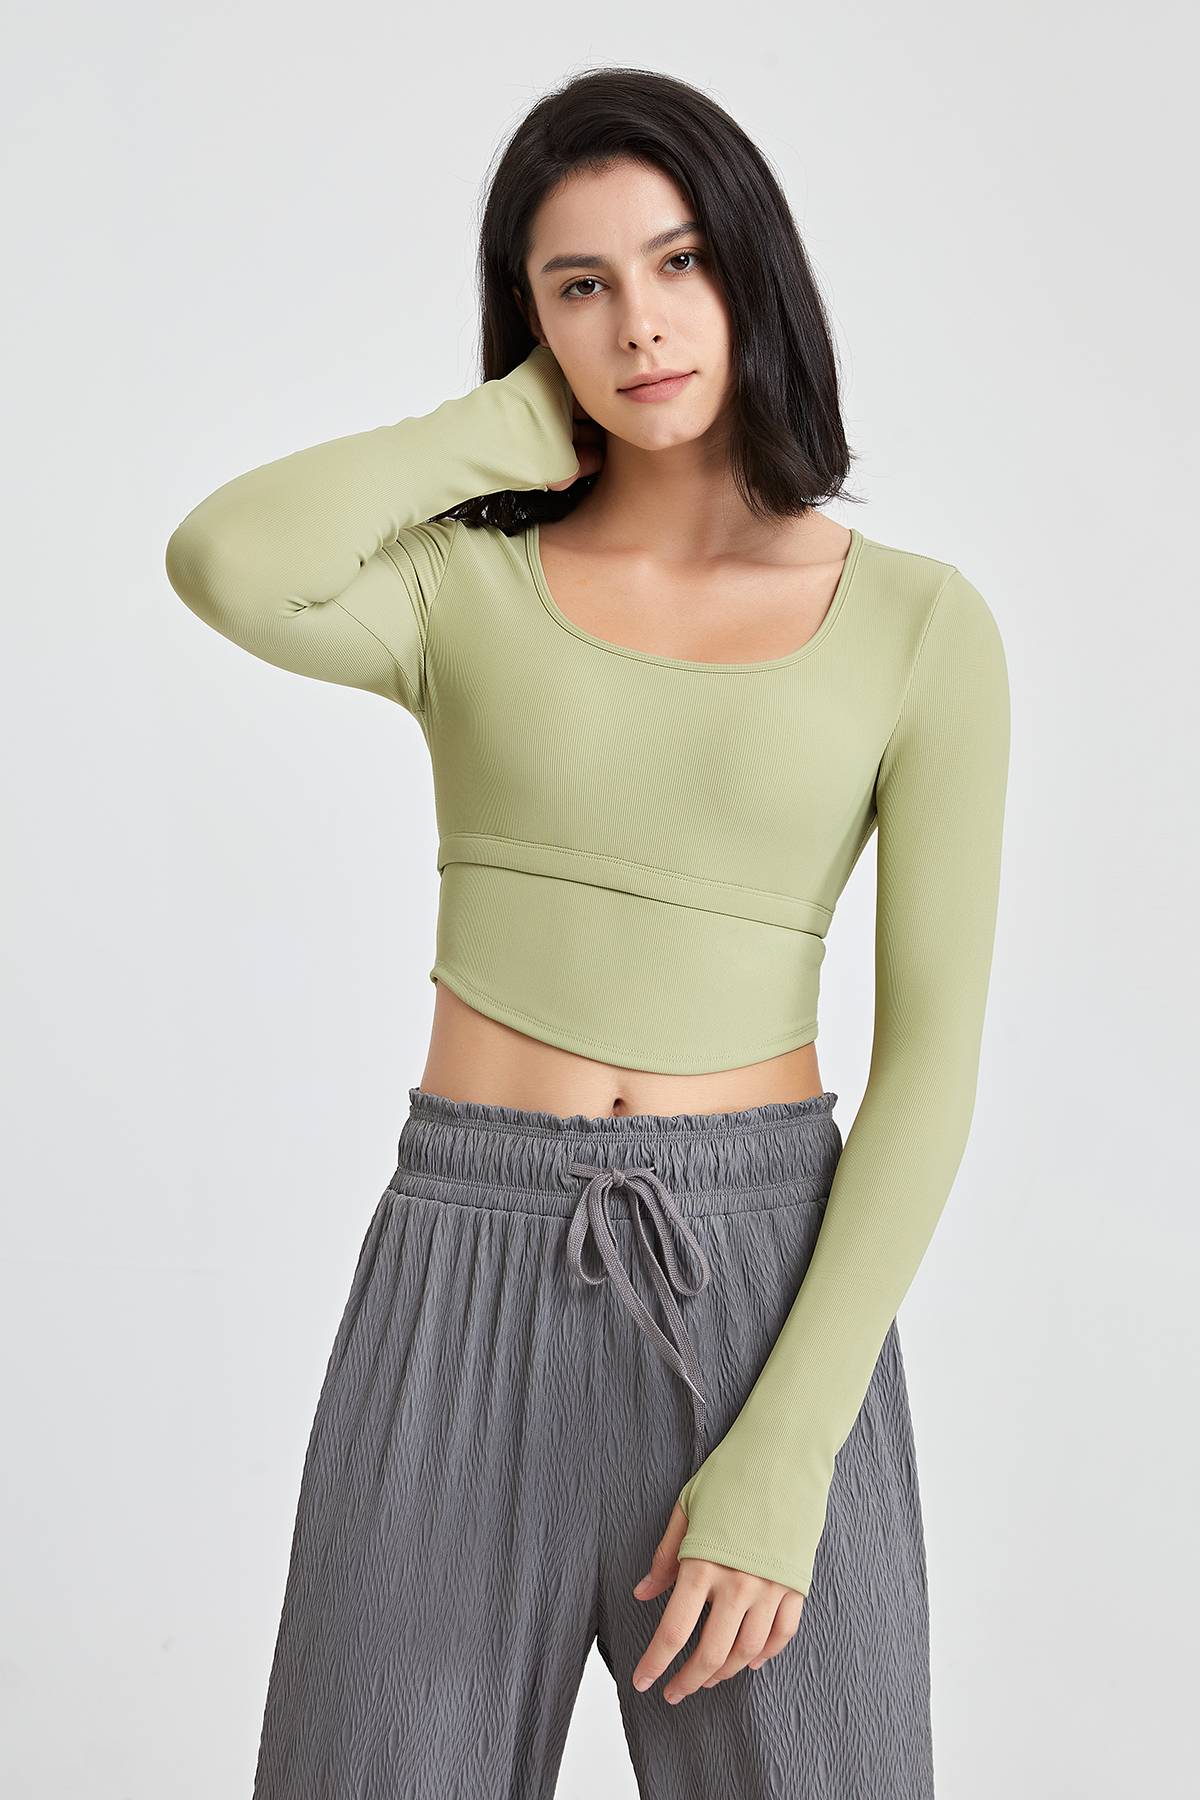 Ribbed Long Sleeve Crop Shirts with Built In Bra for Women – Zioccie